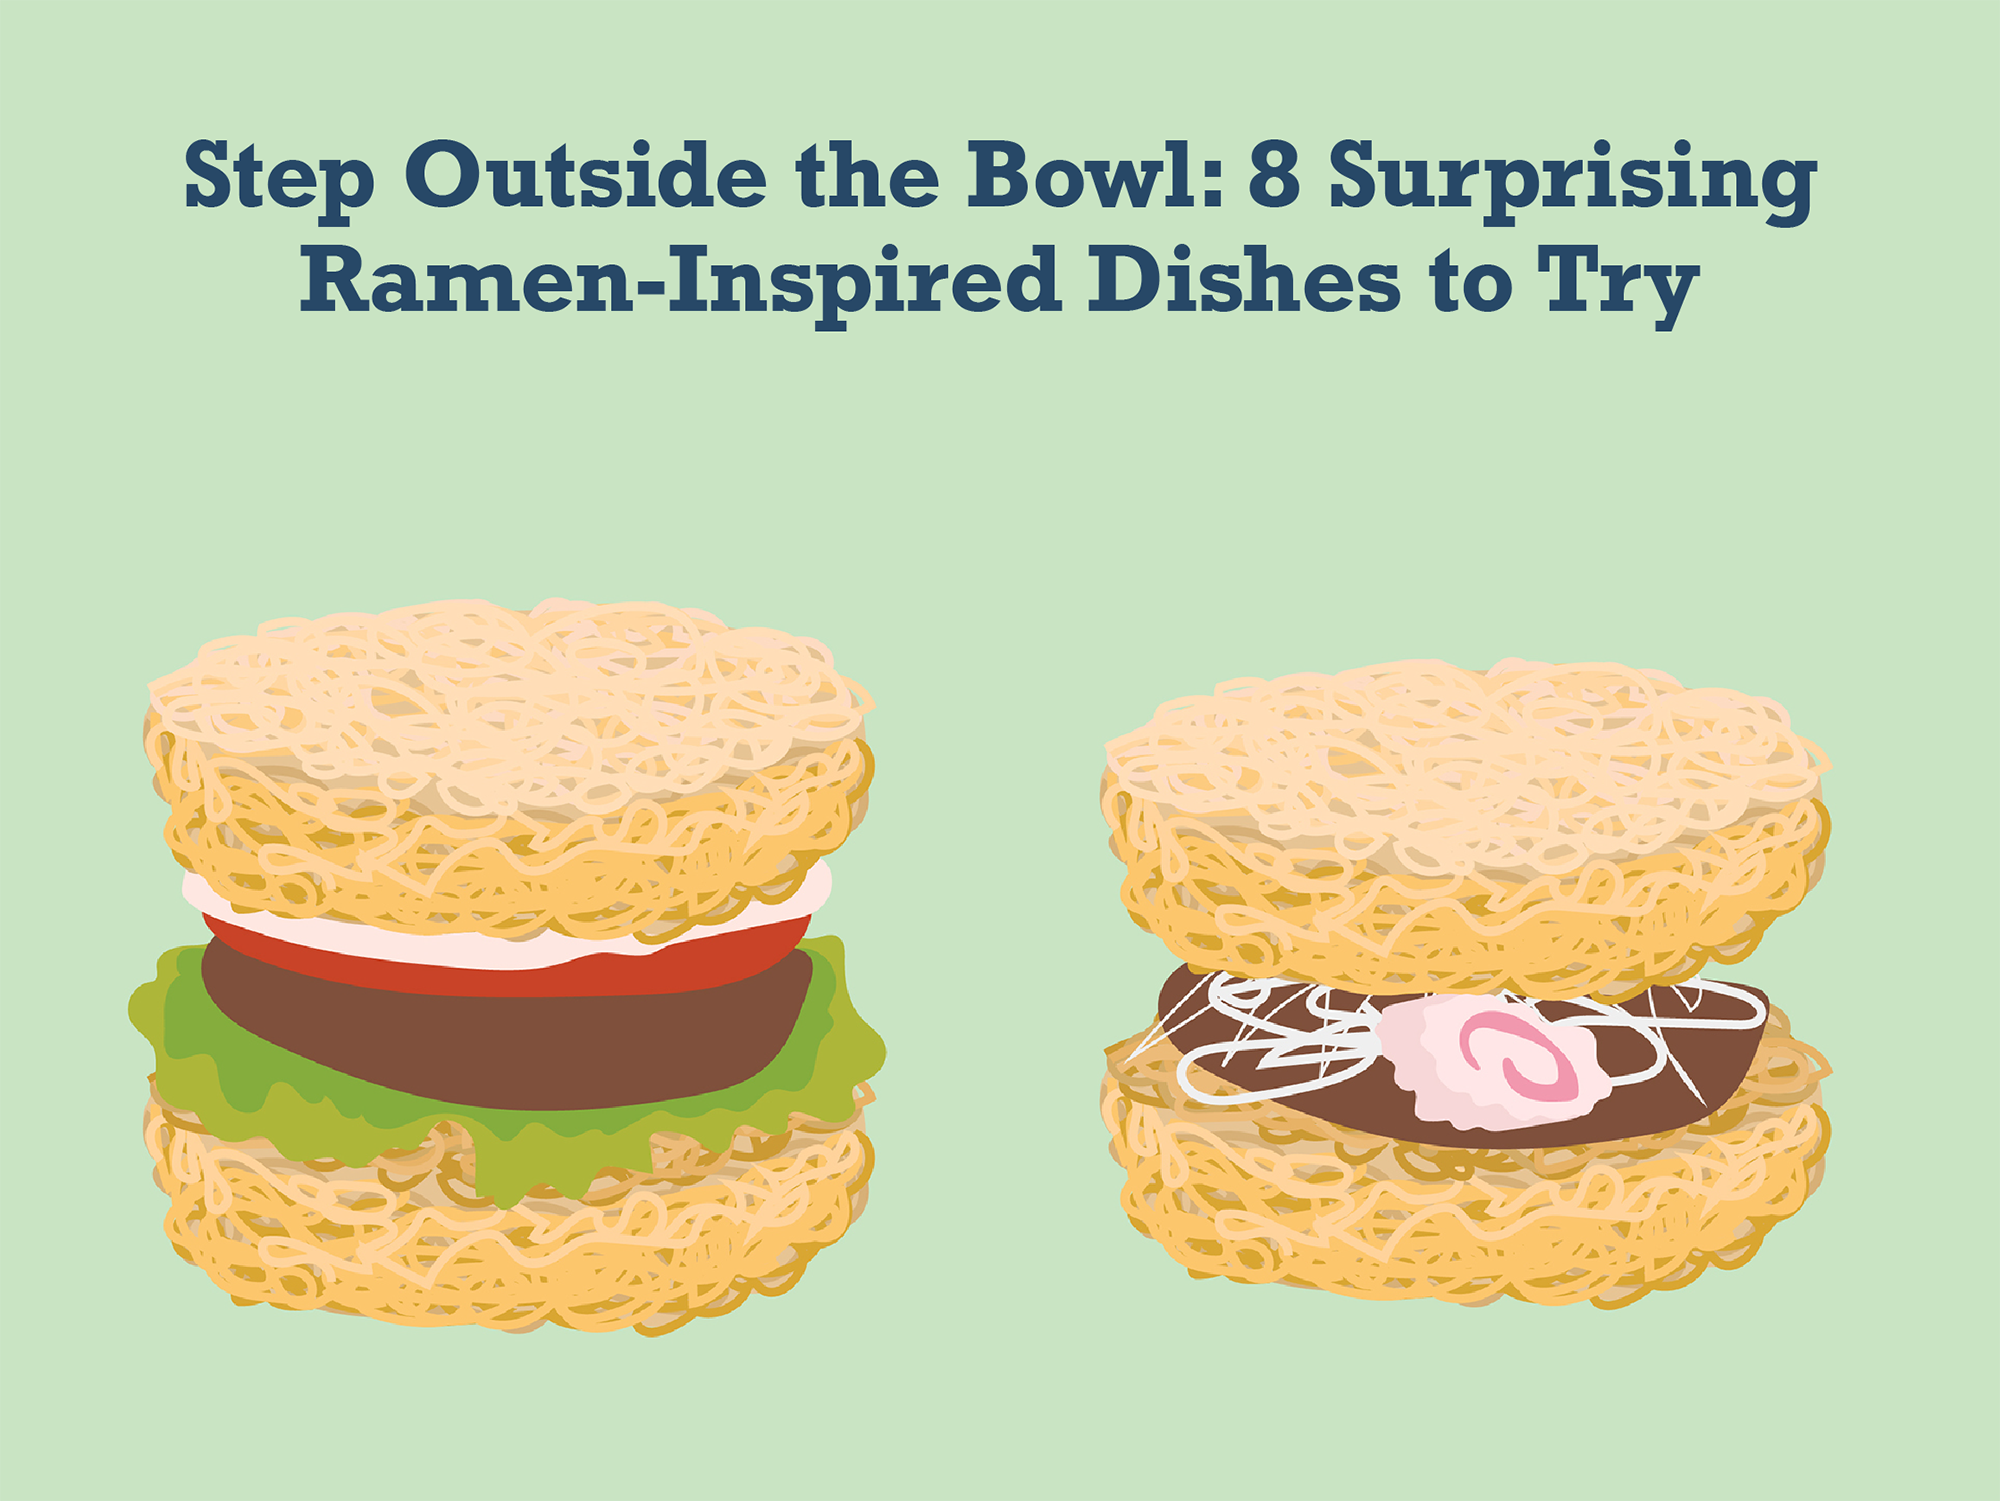 Step Outside the Bowl: 8 Surprising Ramen-Inspired Dishes to Try